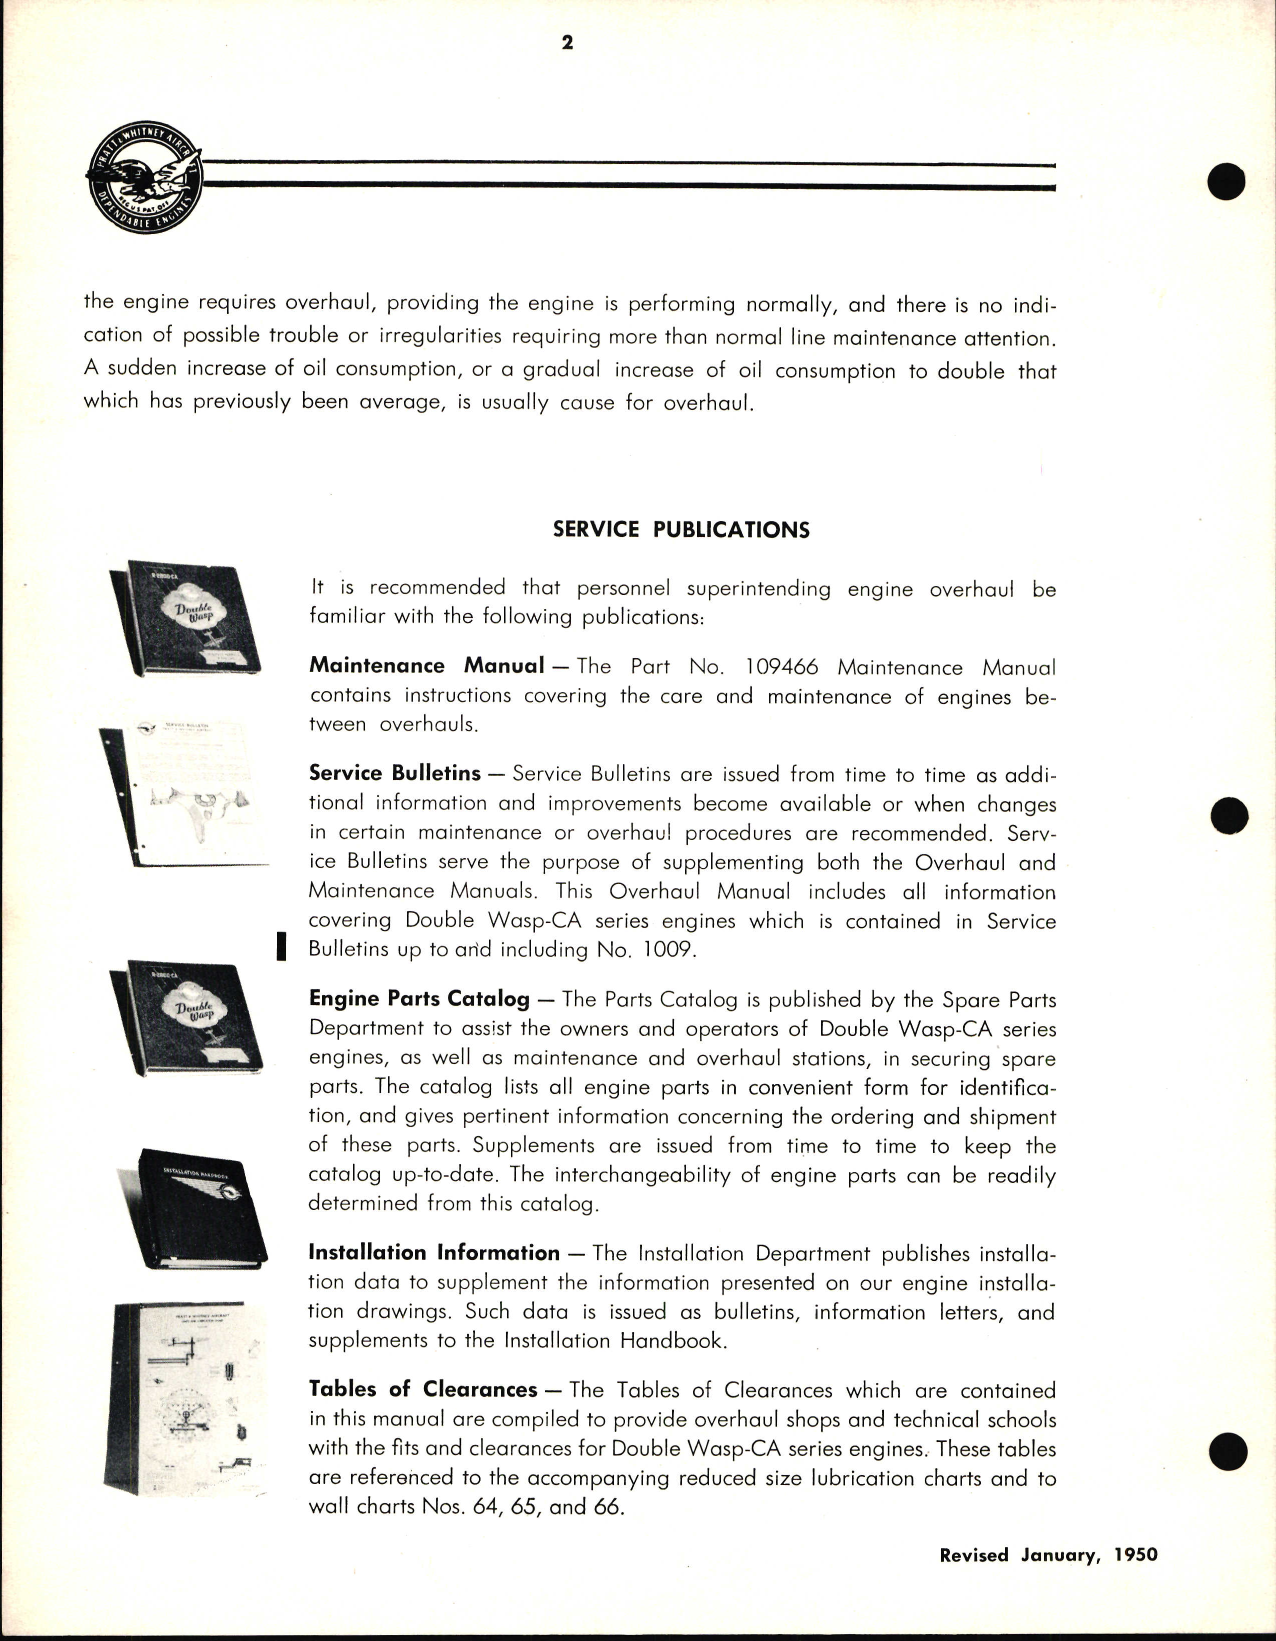 Sample page 6 from AirCorps Library document: Maintenance Manual for Double Wasp CA Series R-2800 Engine